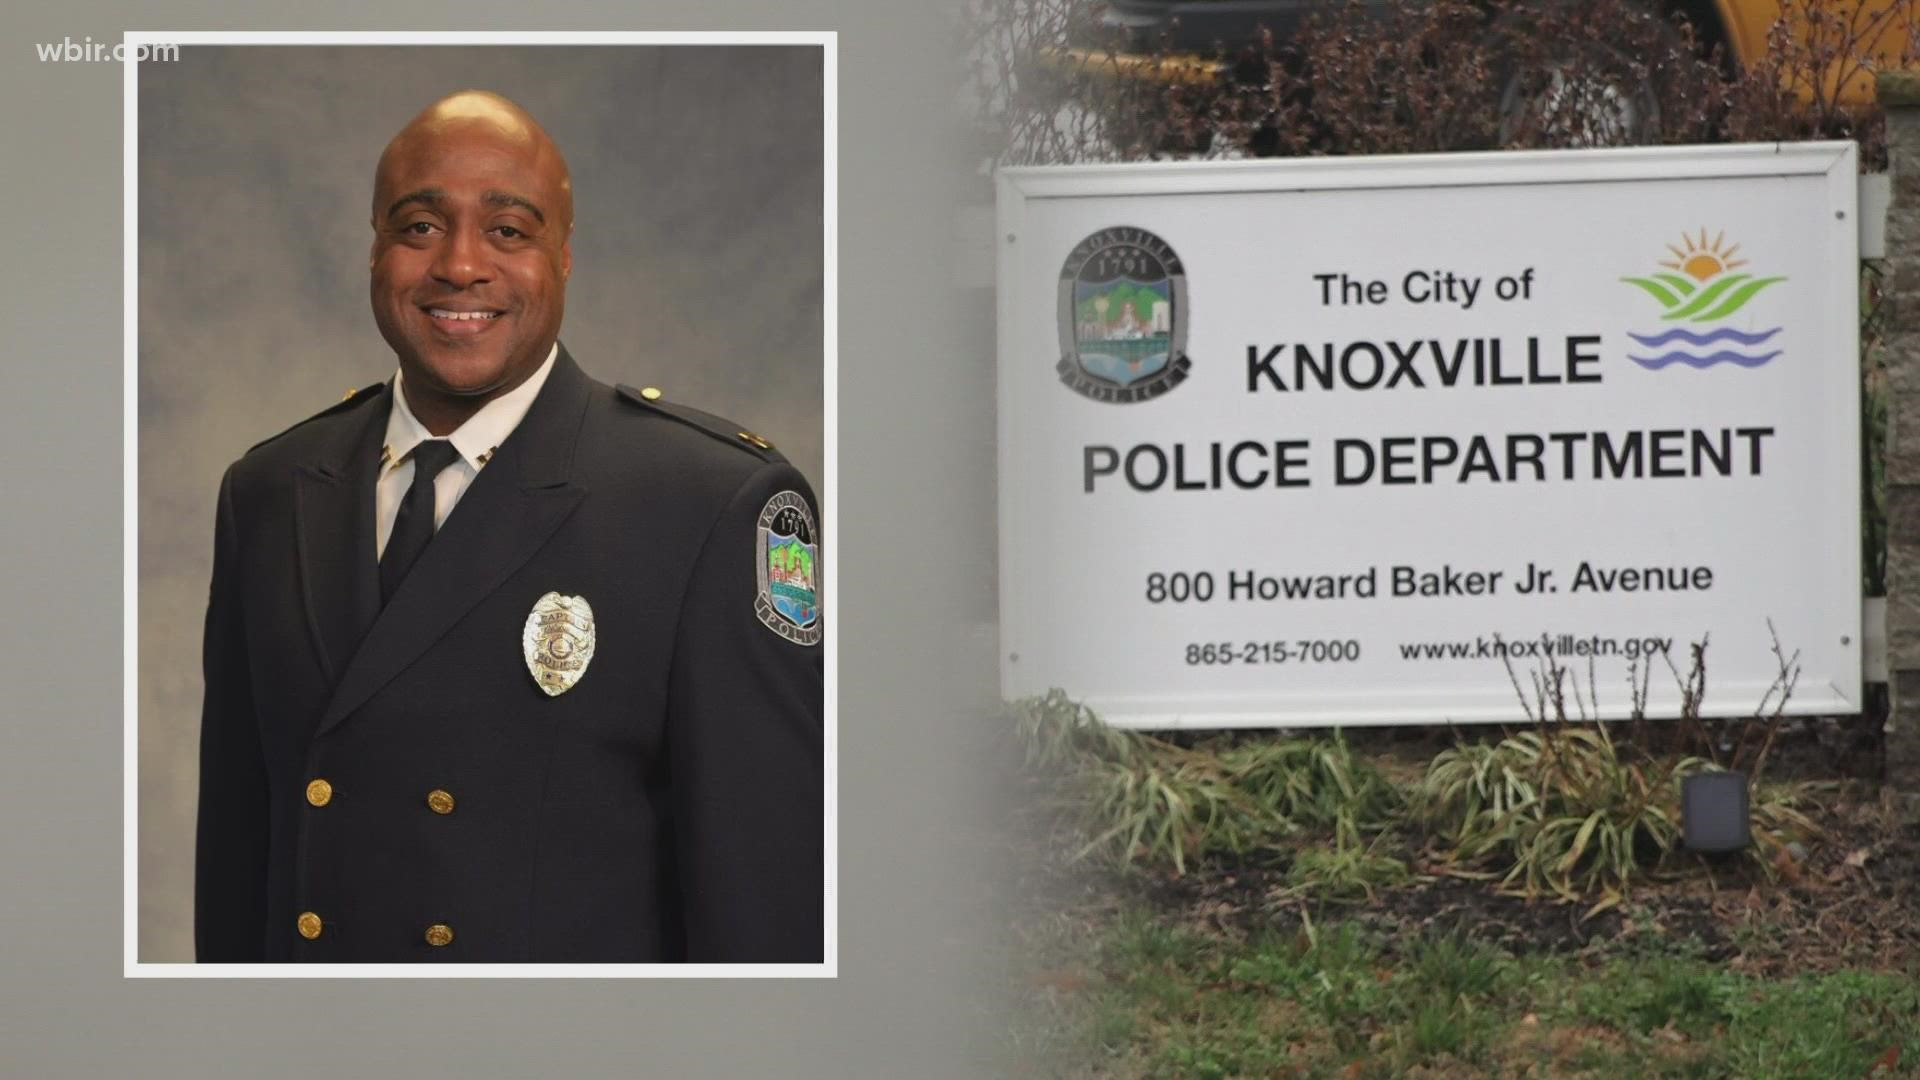 The veteran KPD officer was placed on administrative leave with pay in mid-August. He's still on leave, pending the outcome of an internal investigation.